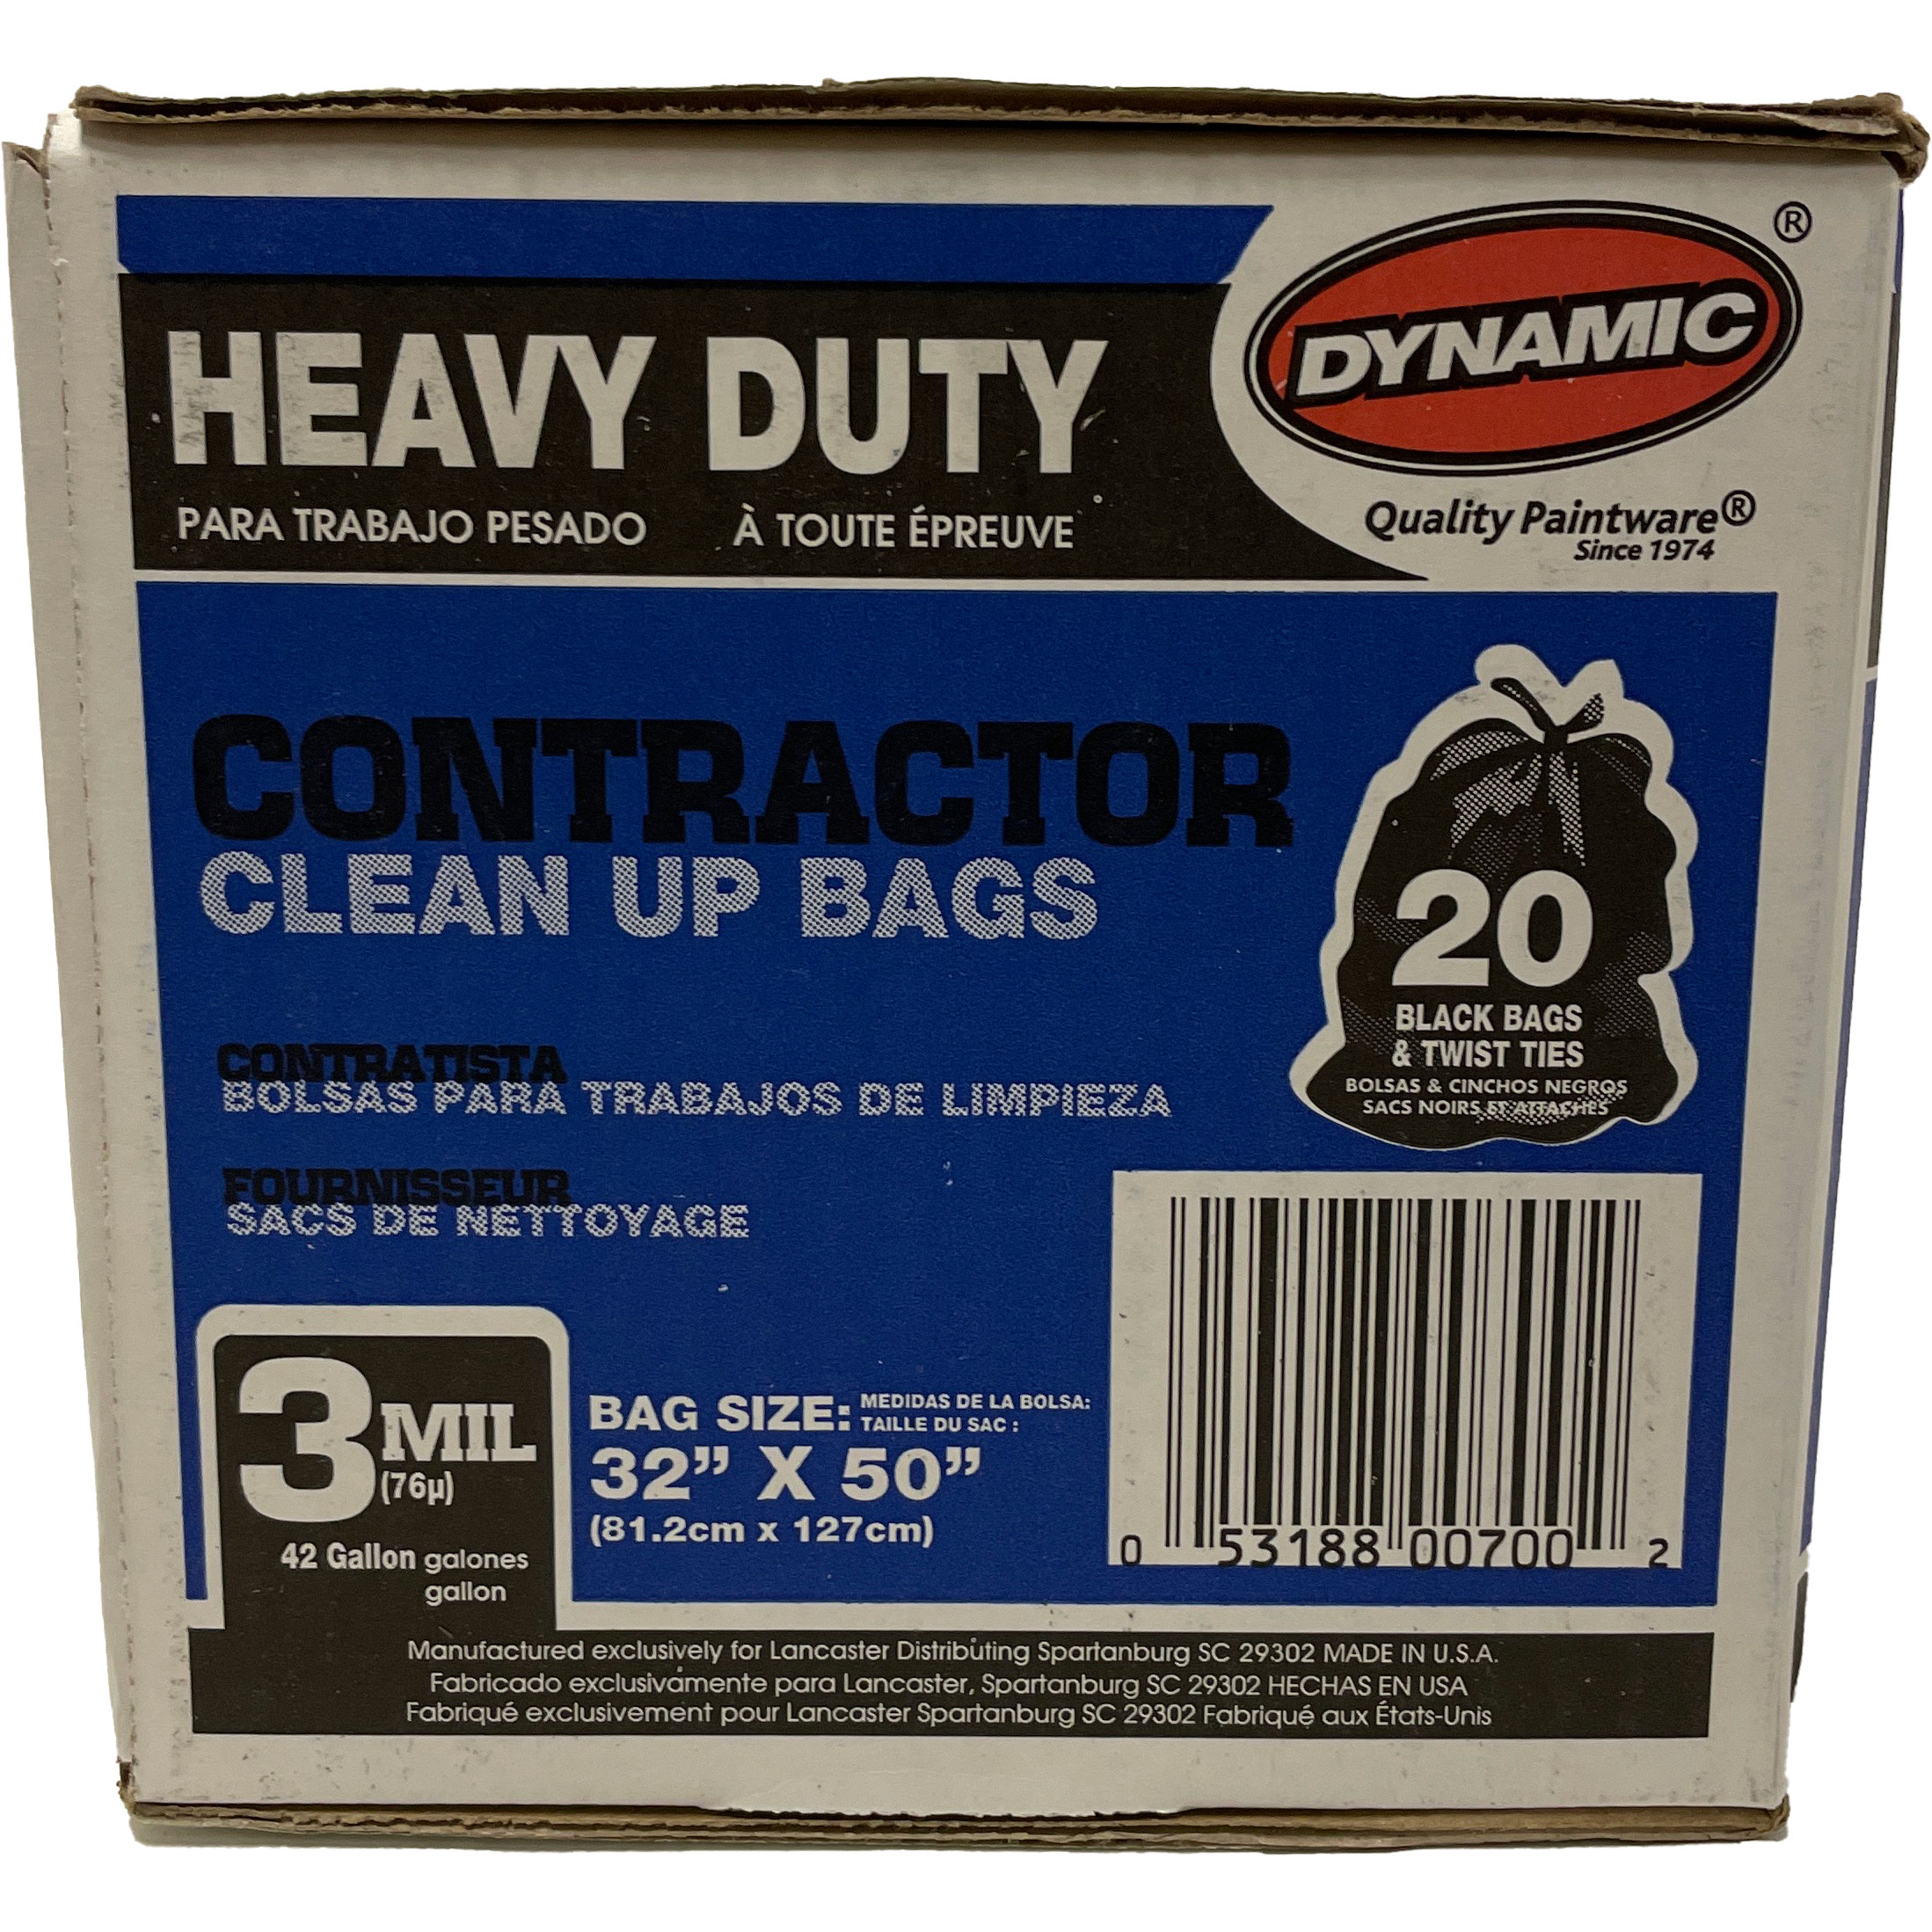 Heavy Duty Contractor Bags 3 mil 42 Gallon (20 Bags)